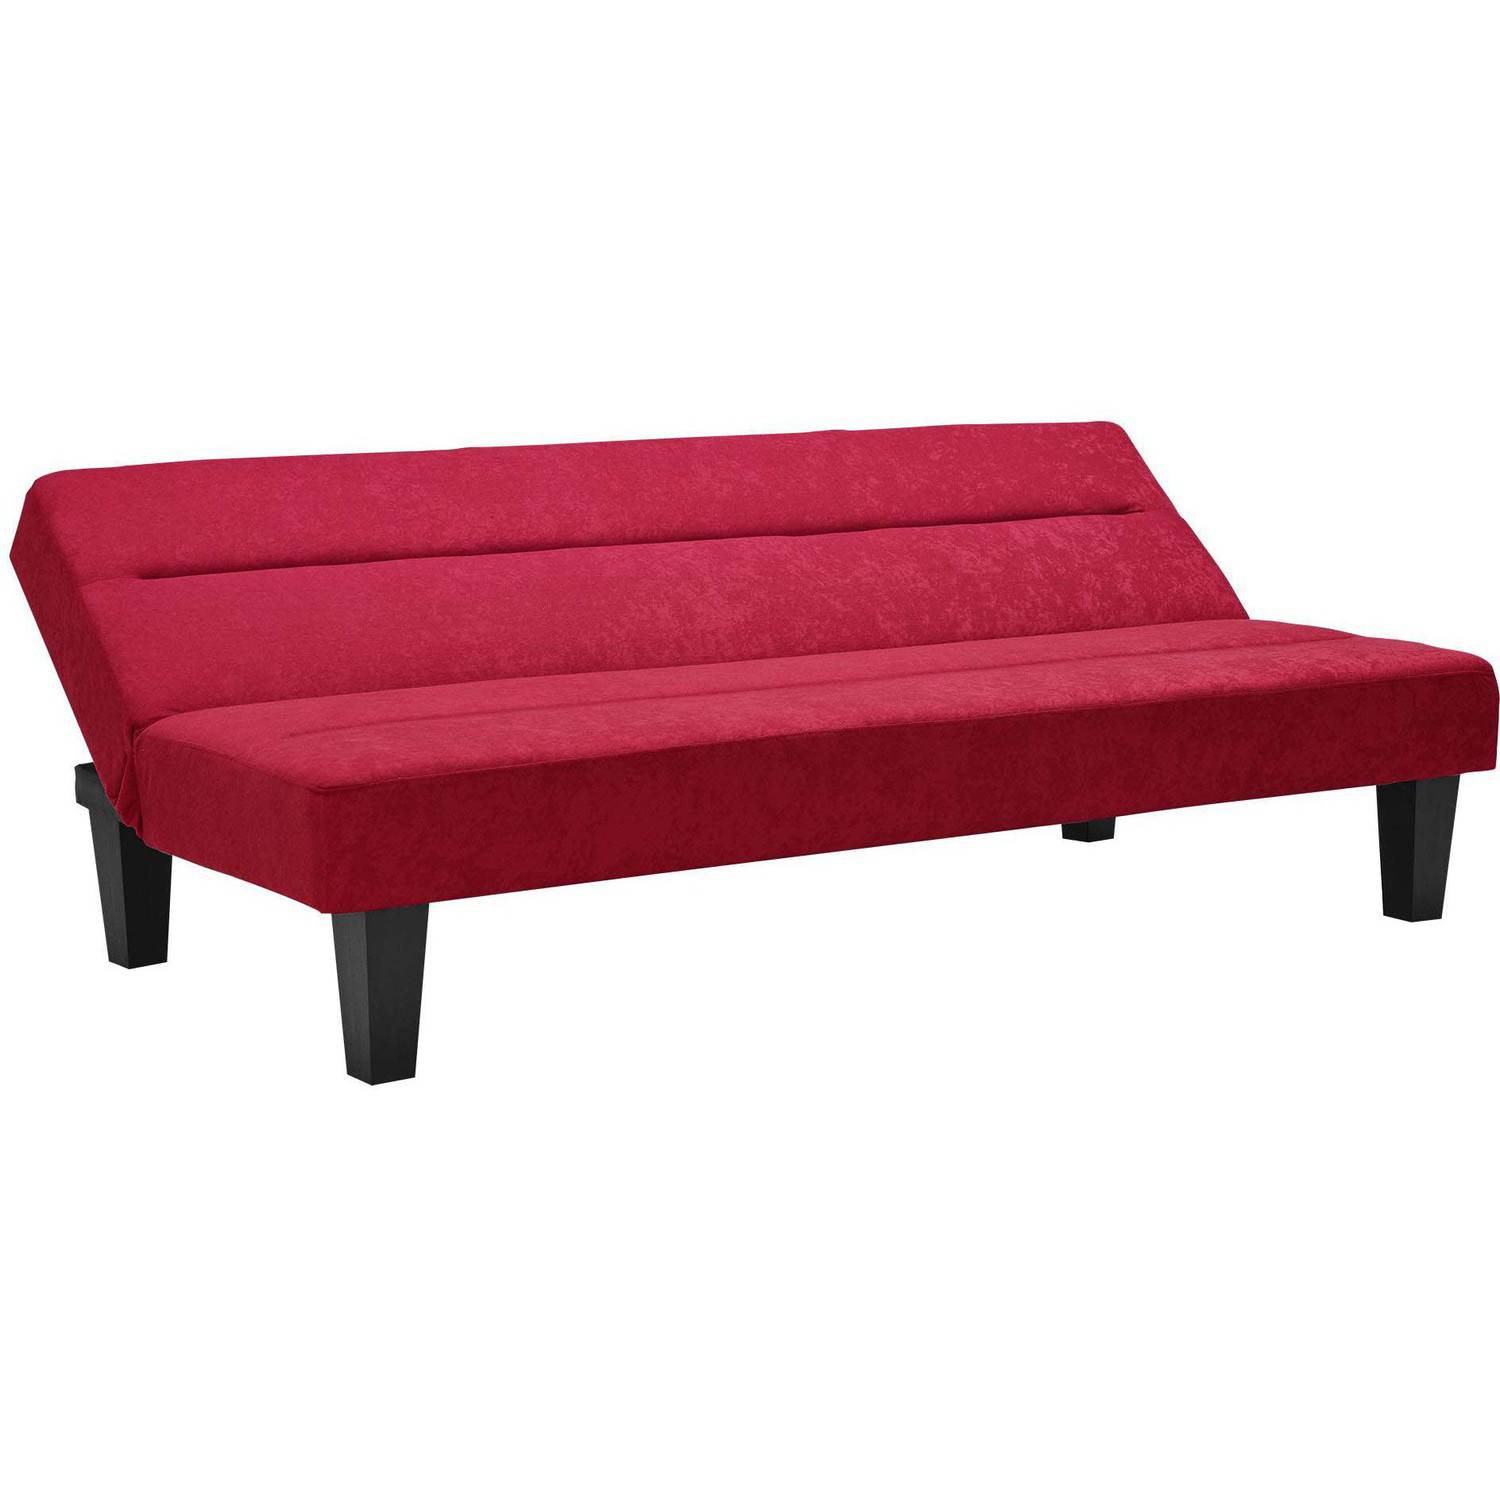 DHP Kebo Futon with Microfiber Cover, Red - image 6 of 13